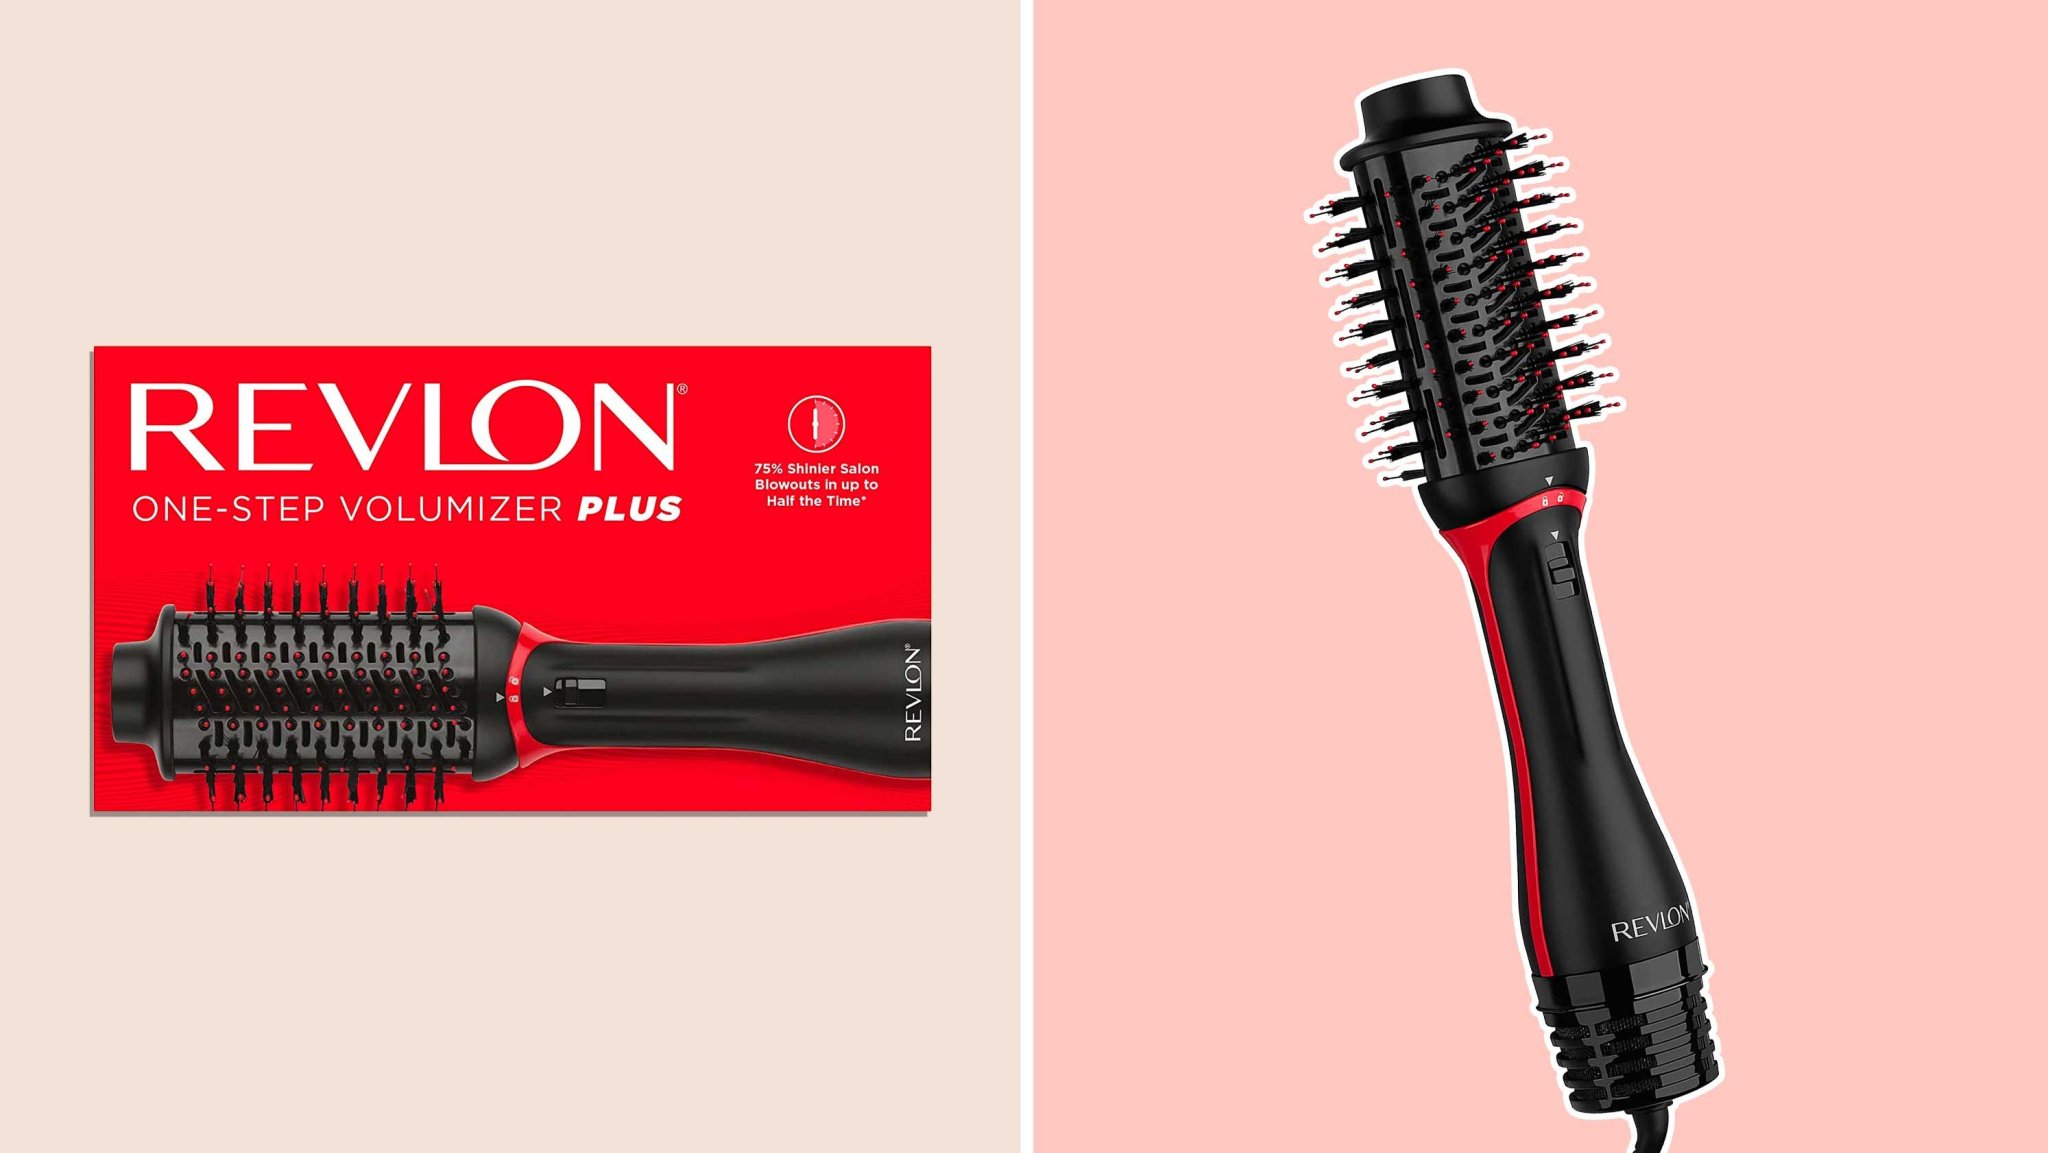 The Revlon One-Step Volumizer Plus 2.0 hair dryer is 42% off right now